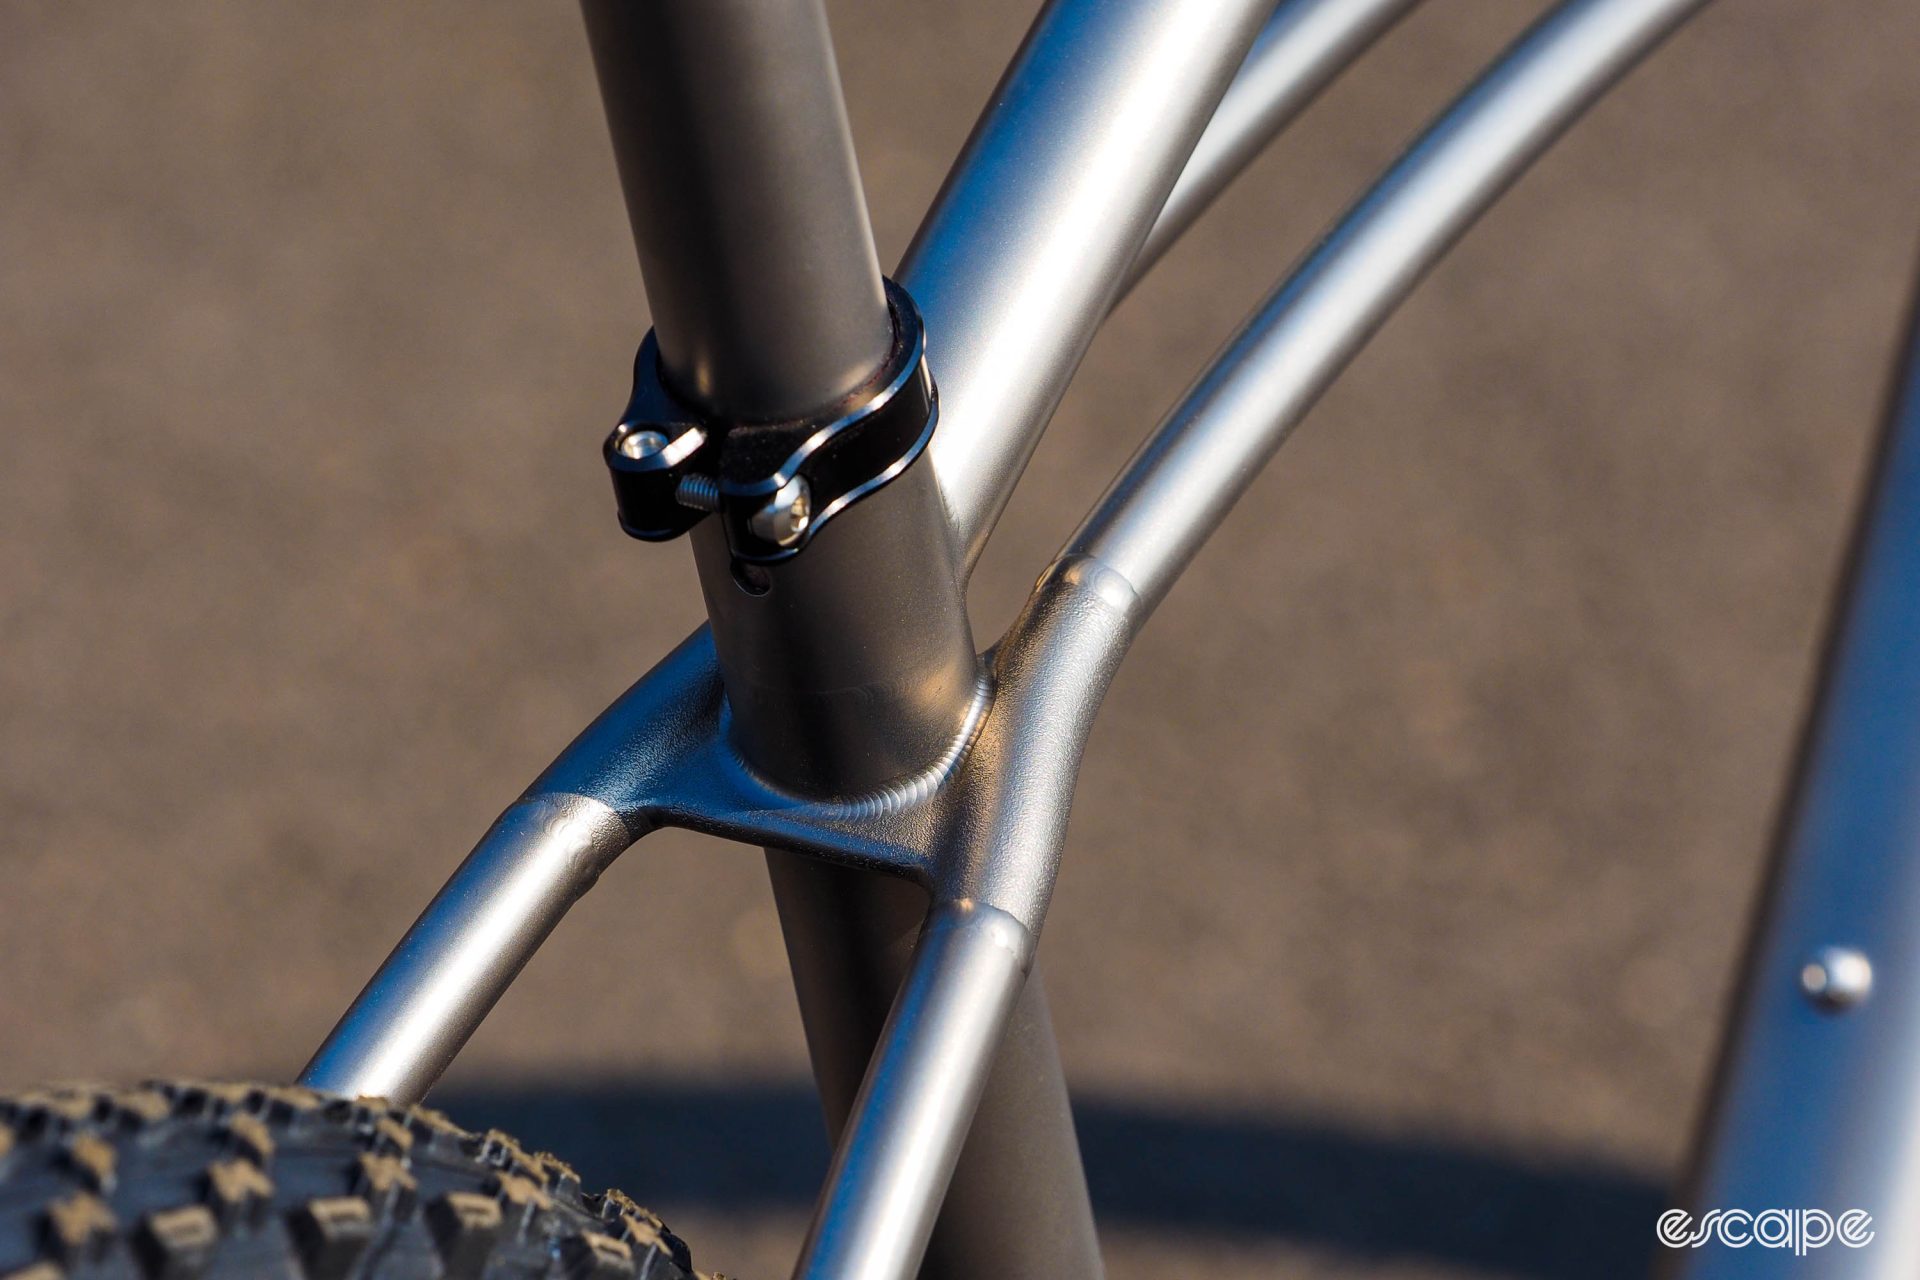 Detail shot of seatpost clamp area, revealing neatly integrated 3D printing.